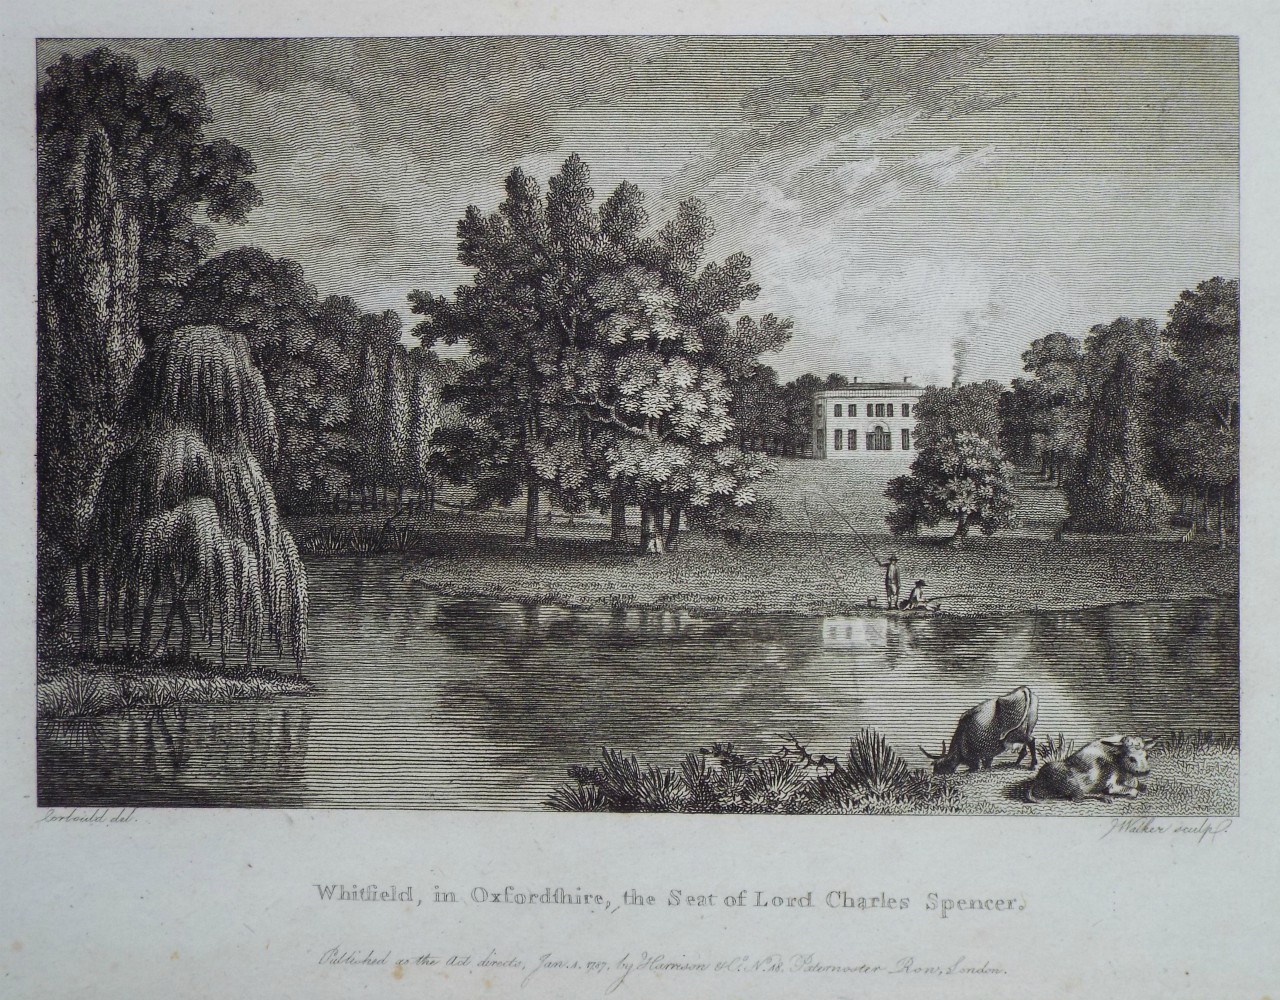 Print - Whitfield, in Oxfordshire, the Seat of Lord Charles Spencer. - 